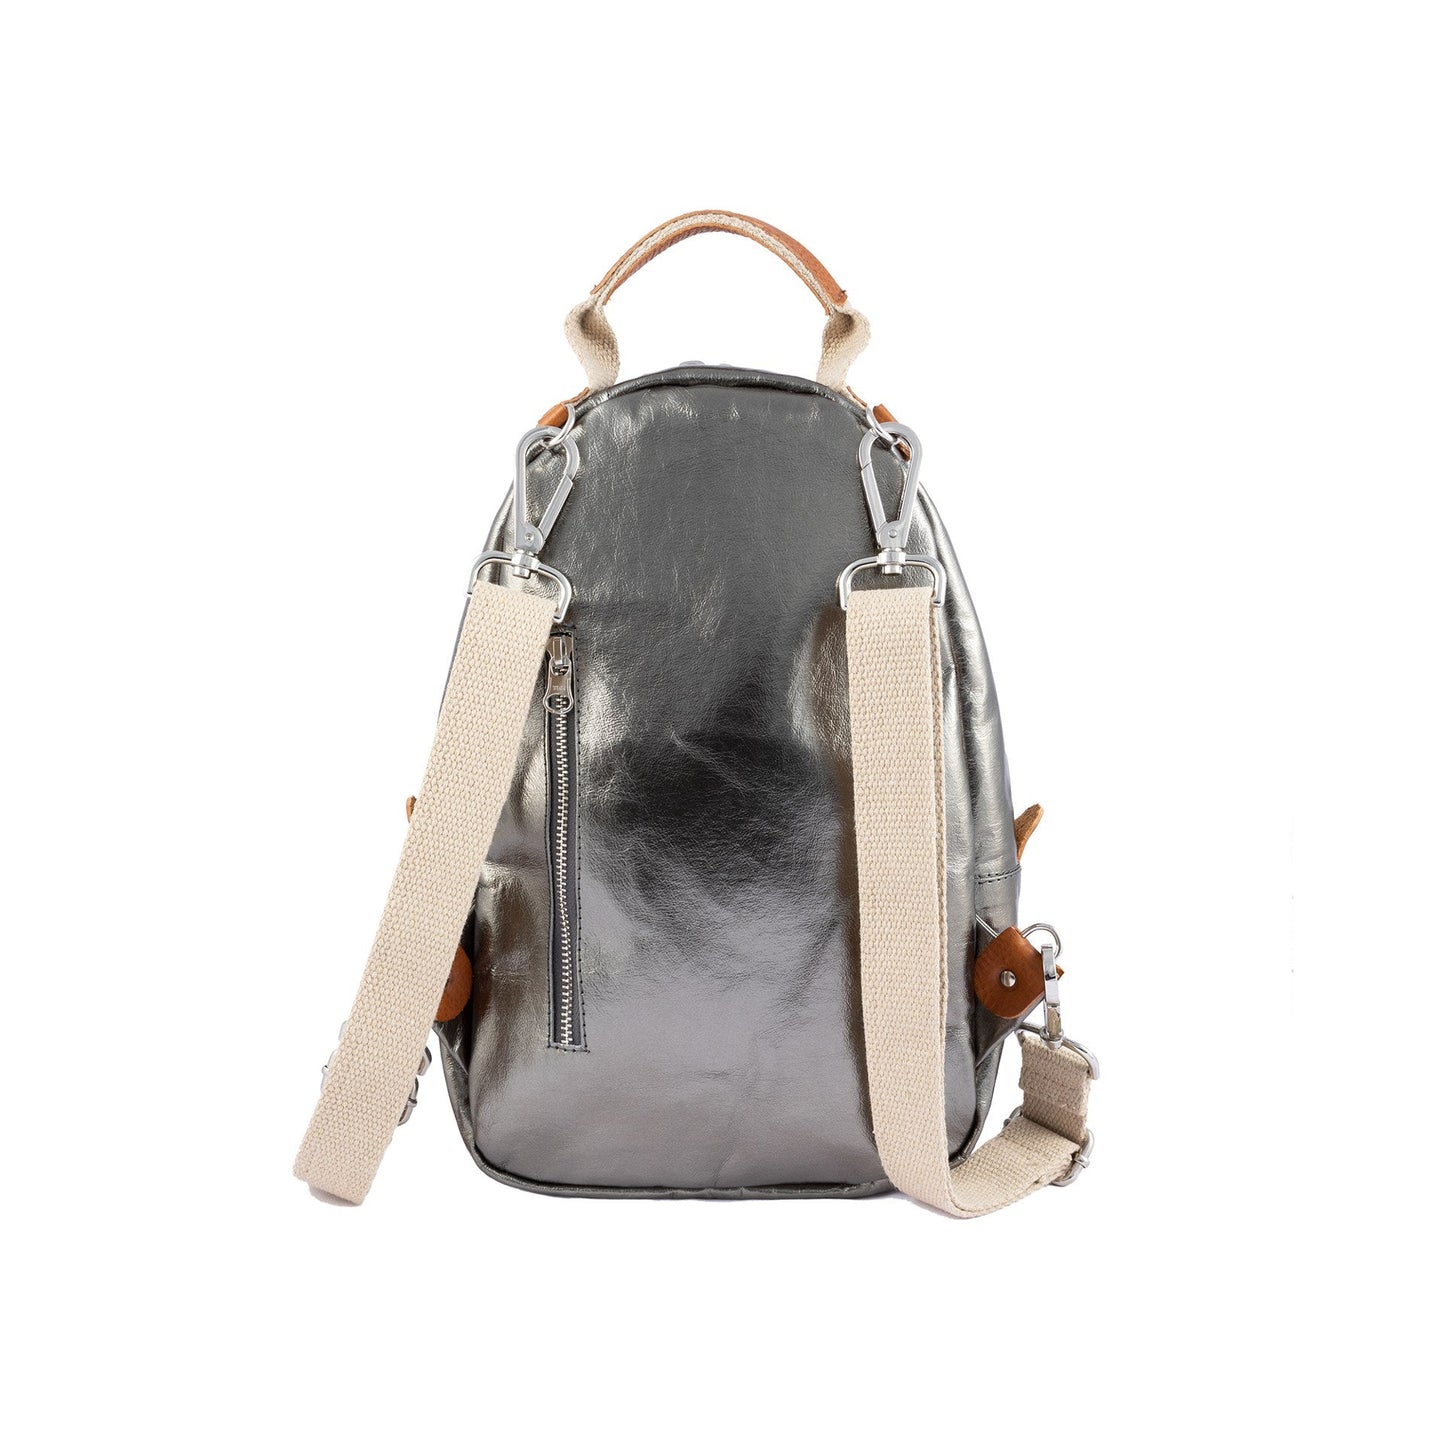 A pewter metallic washable paper backpack is shown from a back angle. It features two adjustable cream canvas shoulder straps and a silver zip pocket in the rear.